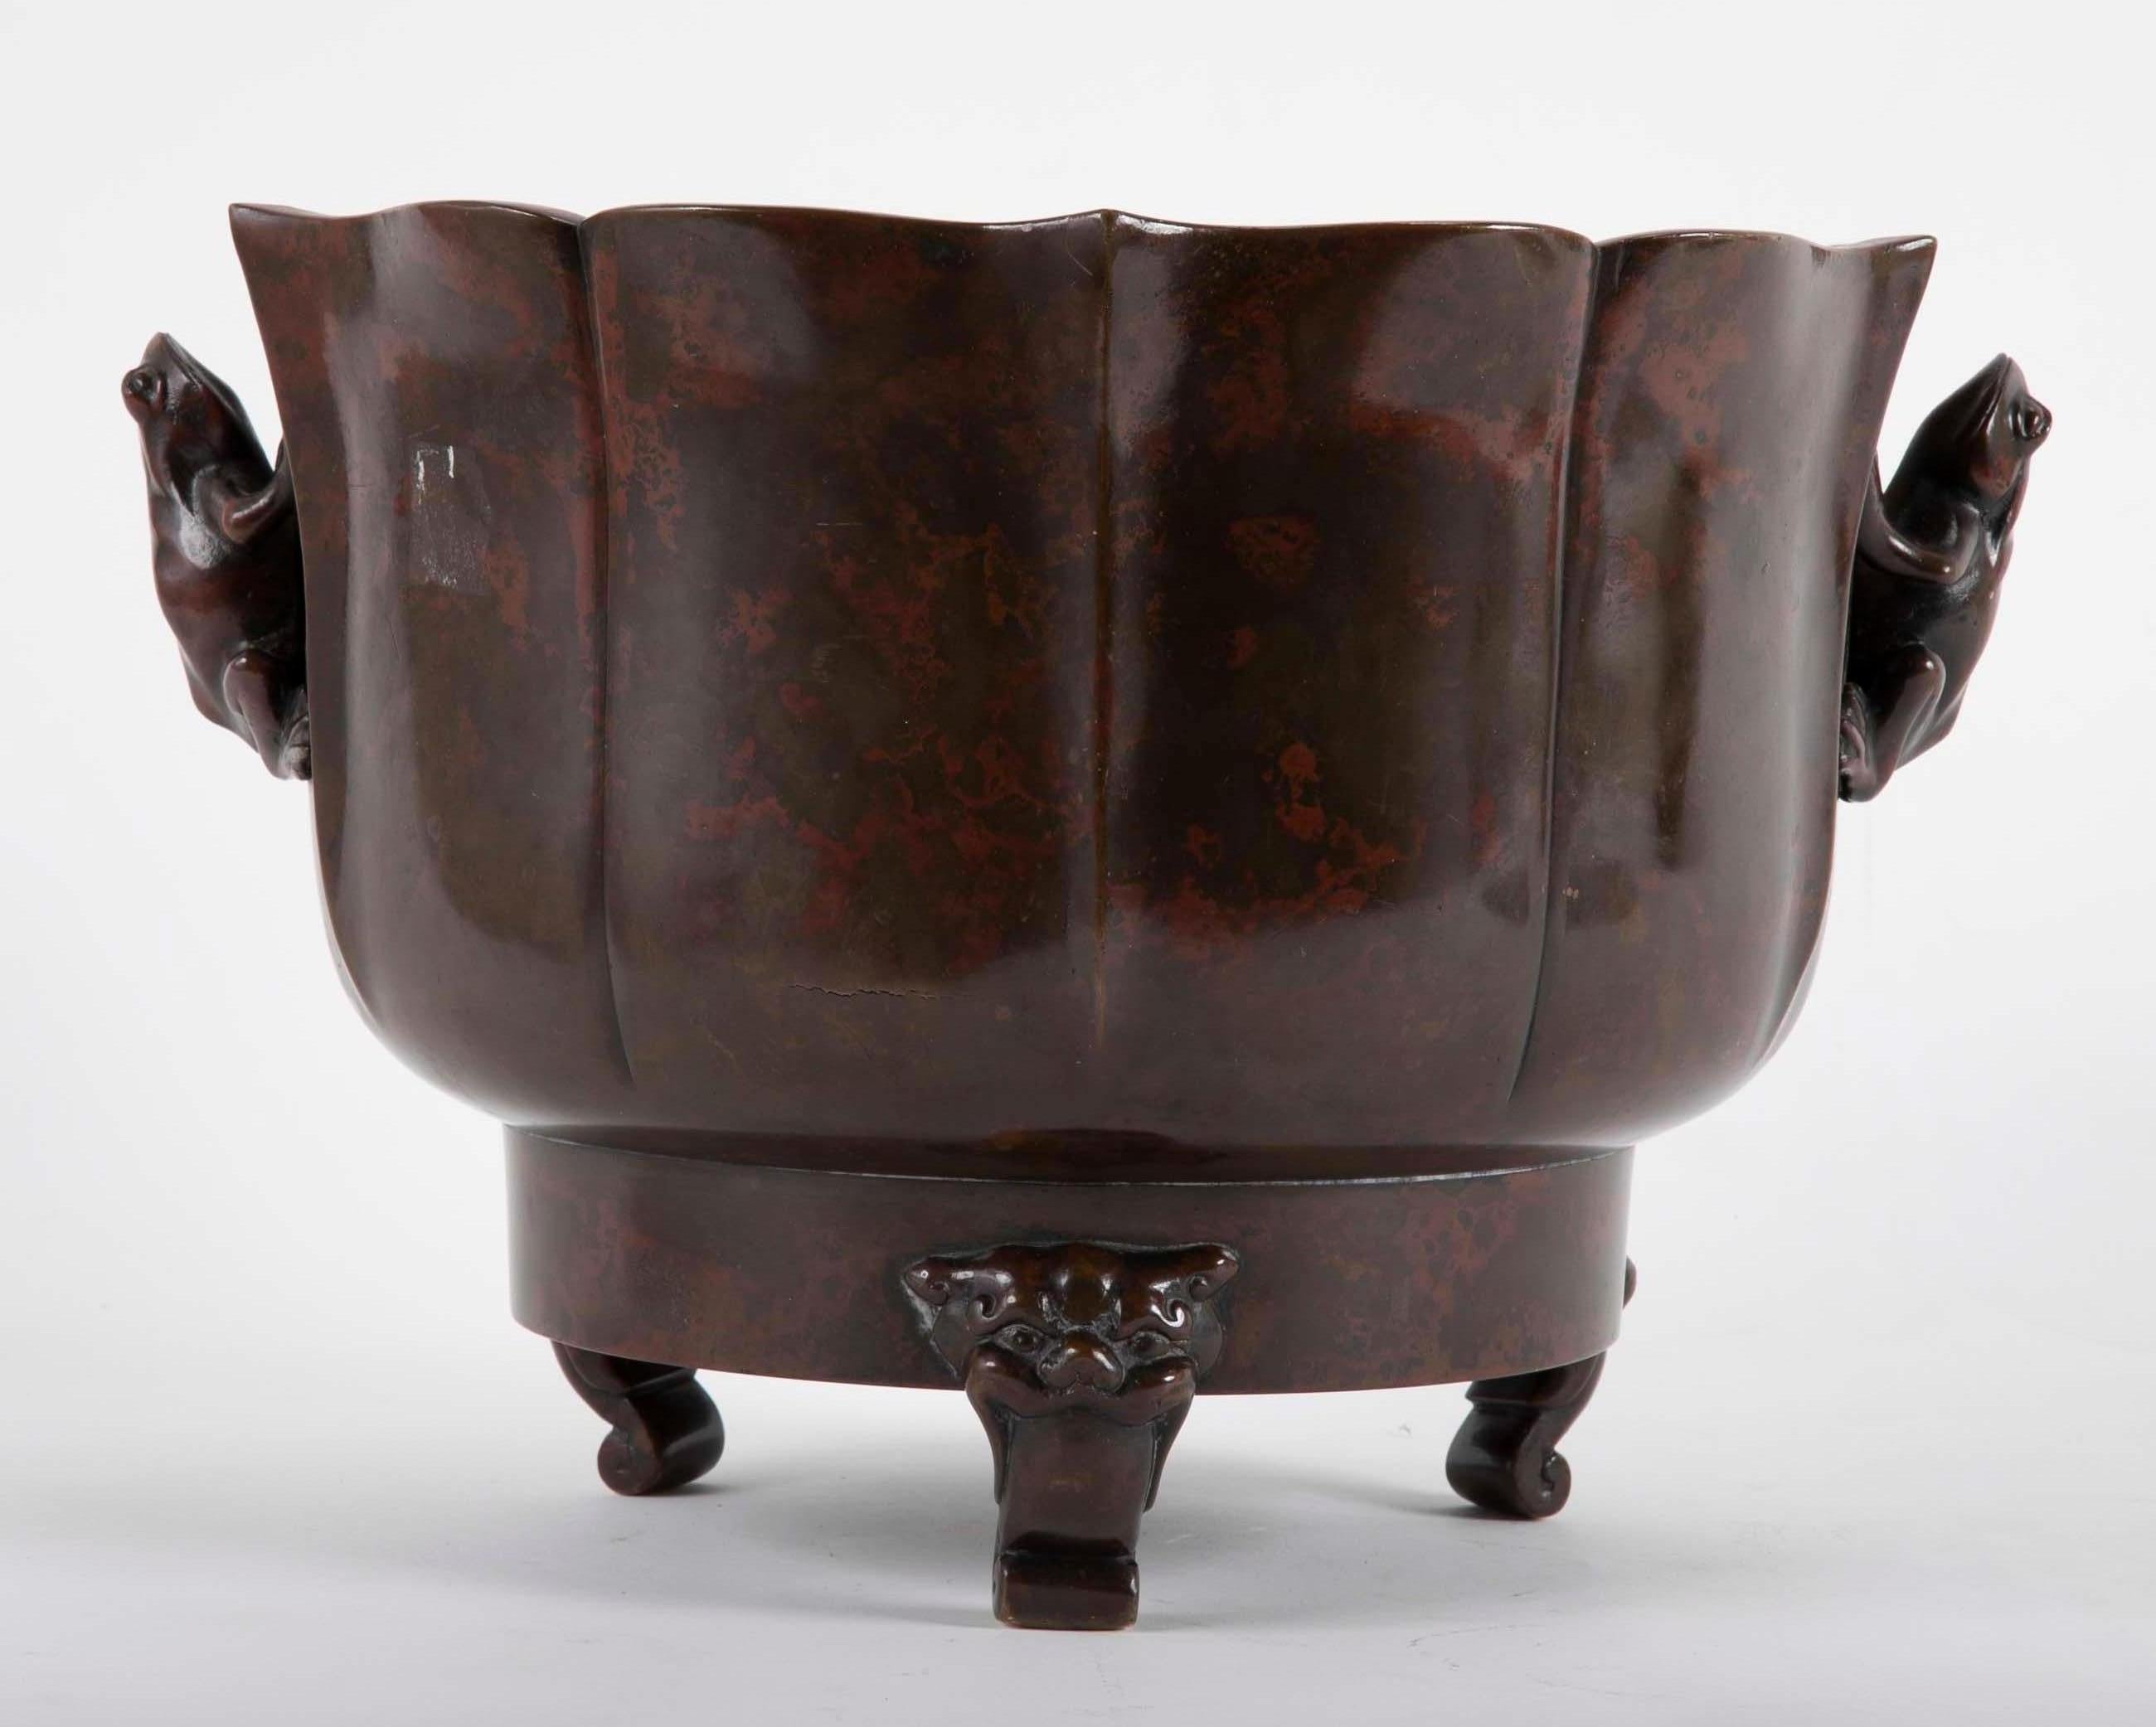 A Japanese Meiji censer rising on three stylized Foo Dogs feet with Frog form handles. Censer having exceptional patination. 
Acquired from Michael Goedhuis, London, 19 June 1987 by repute.